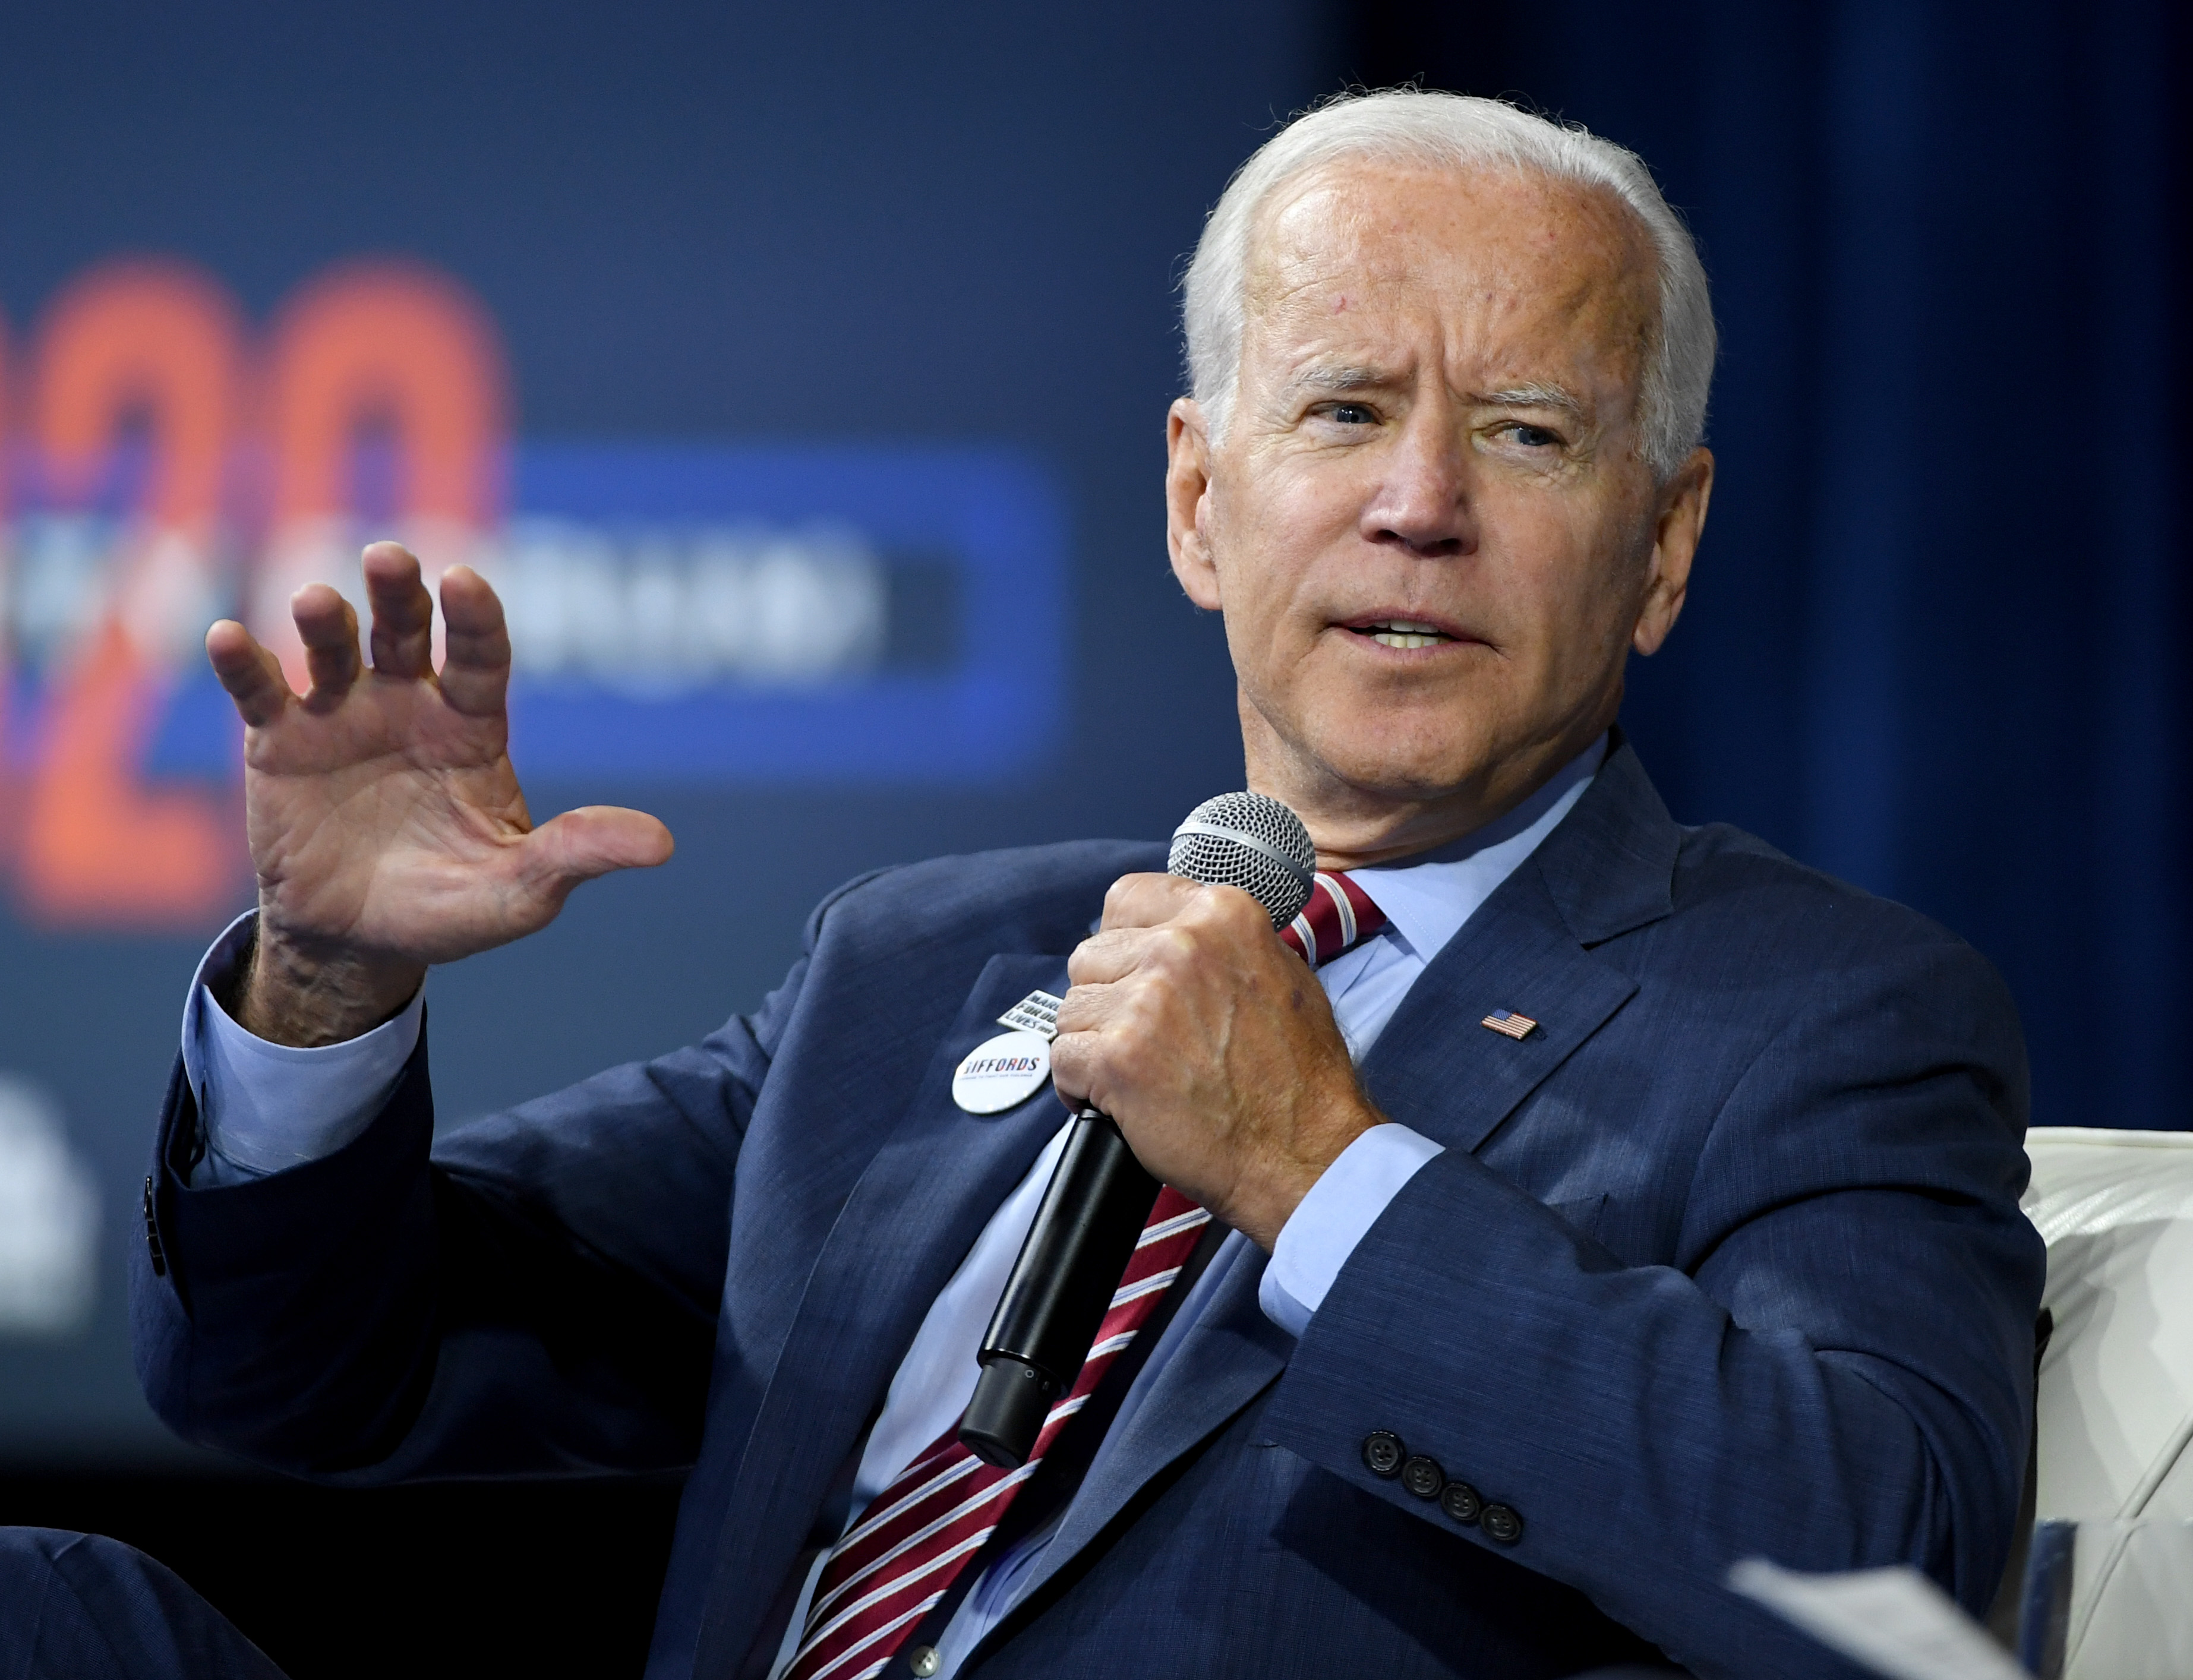 Former Vice President Joe Biden attends the 2020 Gun Safety Forum, hosted by gun control activist groups Giffords and March for Our Lives.